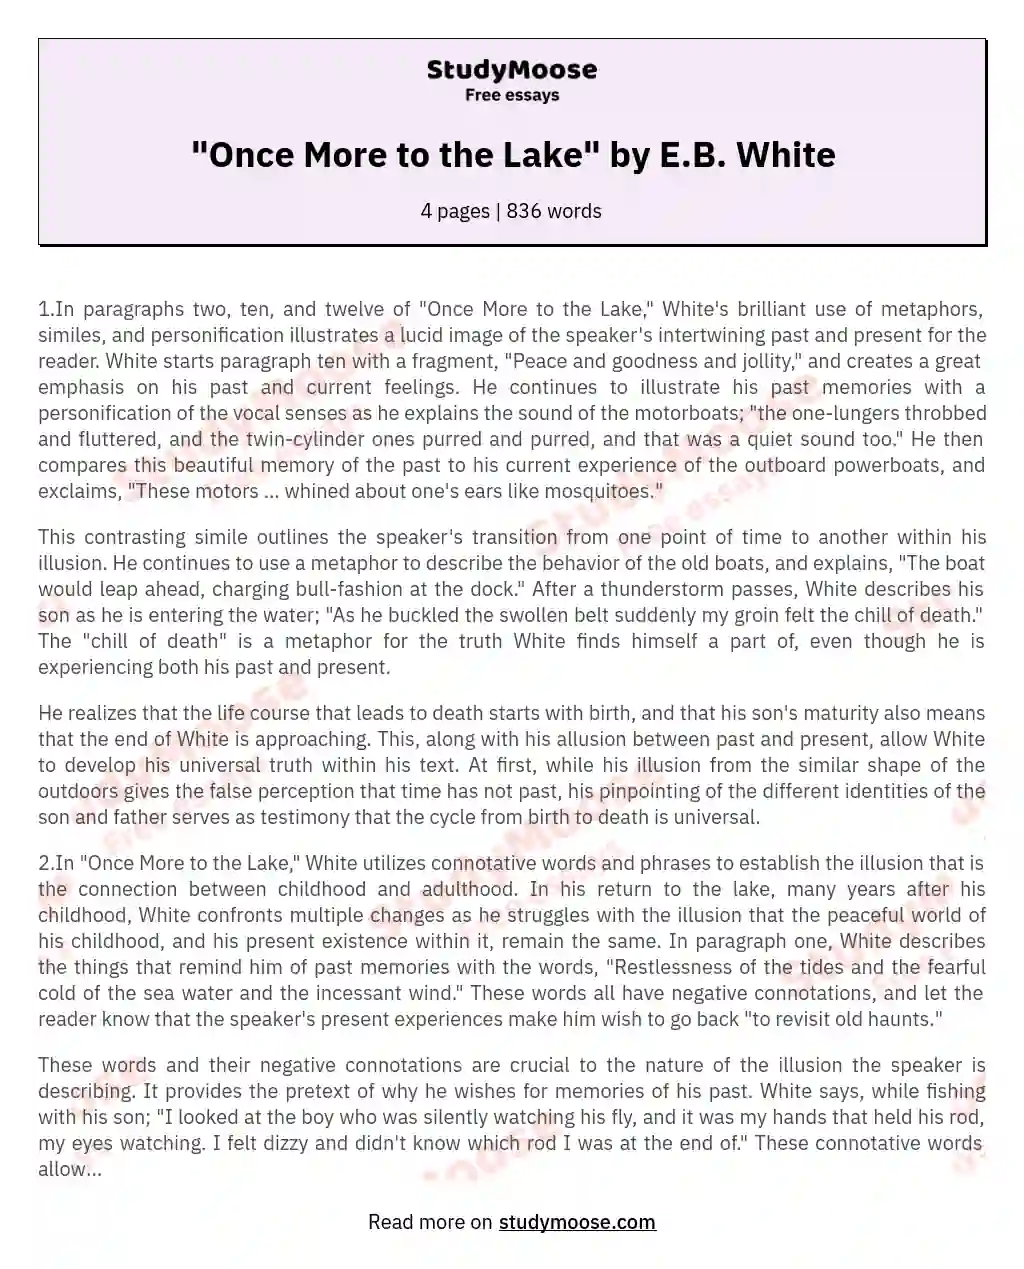 "Once More to the Lake" by E.B. White essay